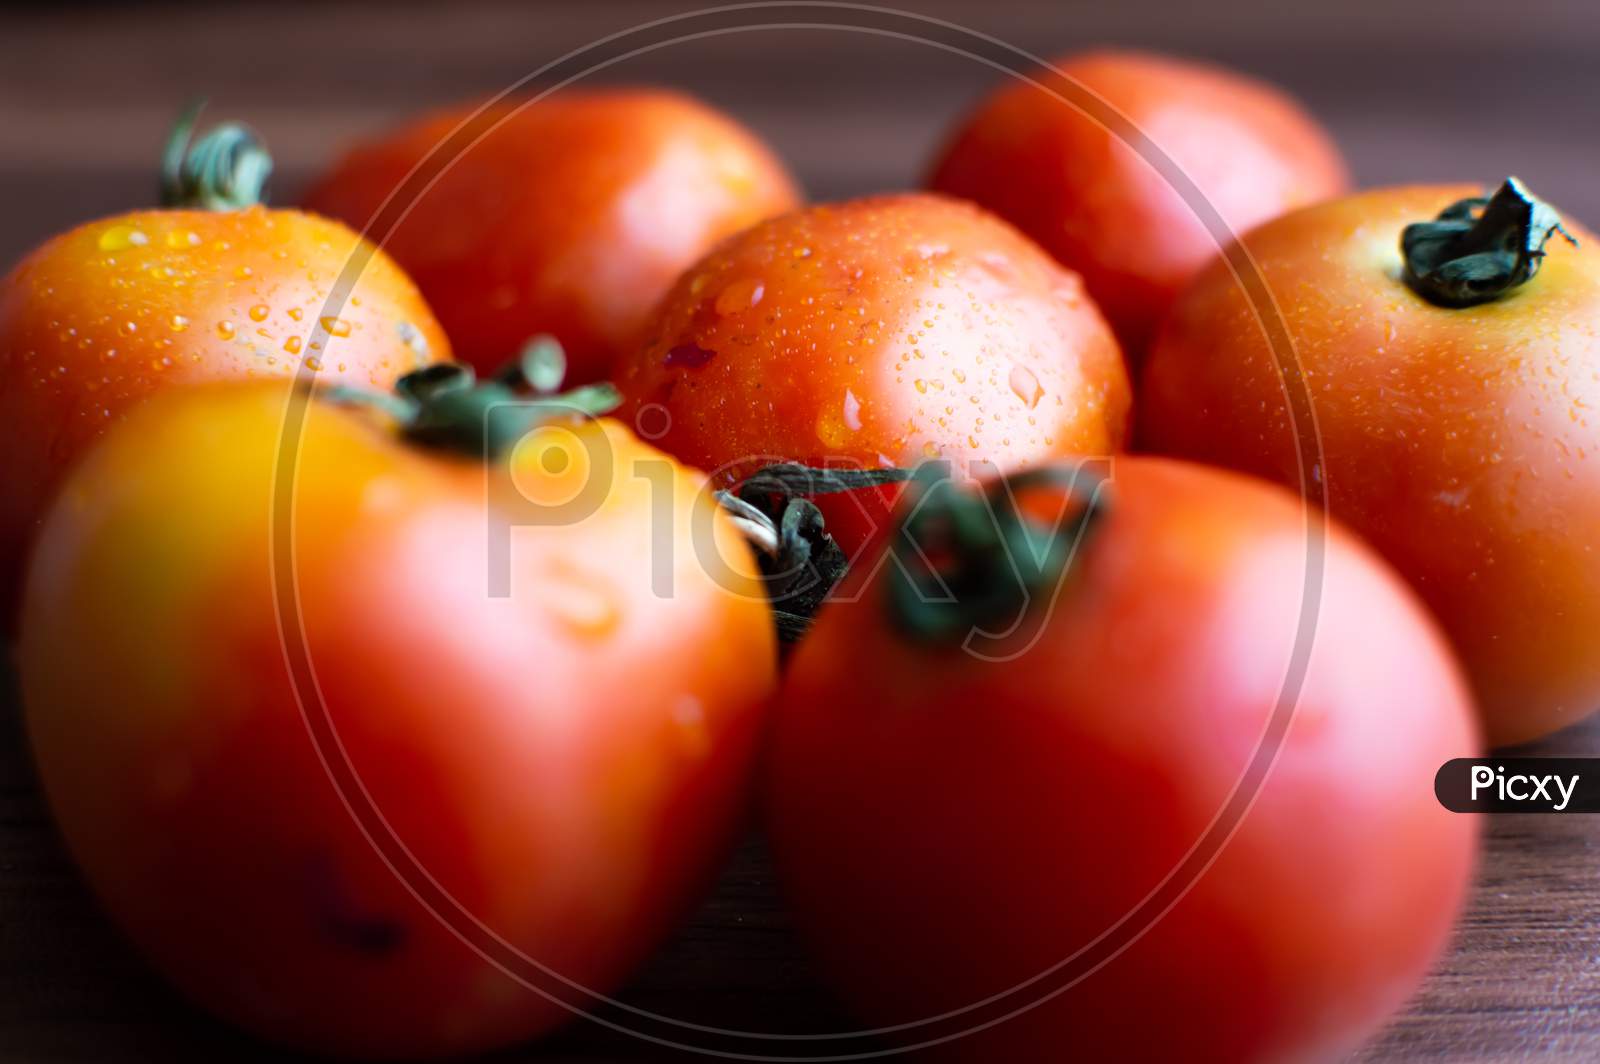 Tomatoes placed together and one is focused